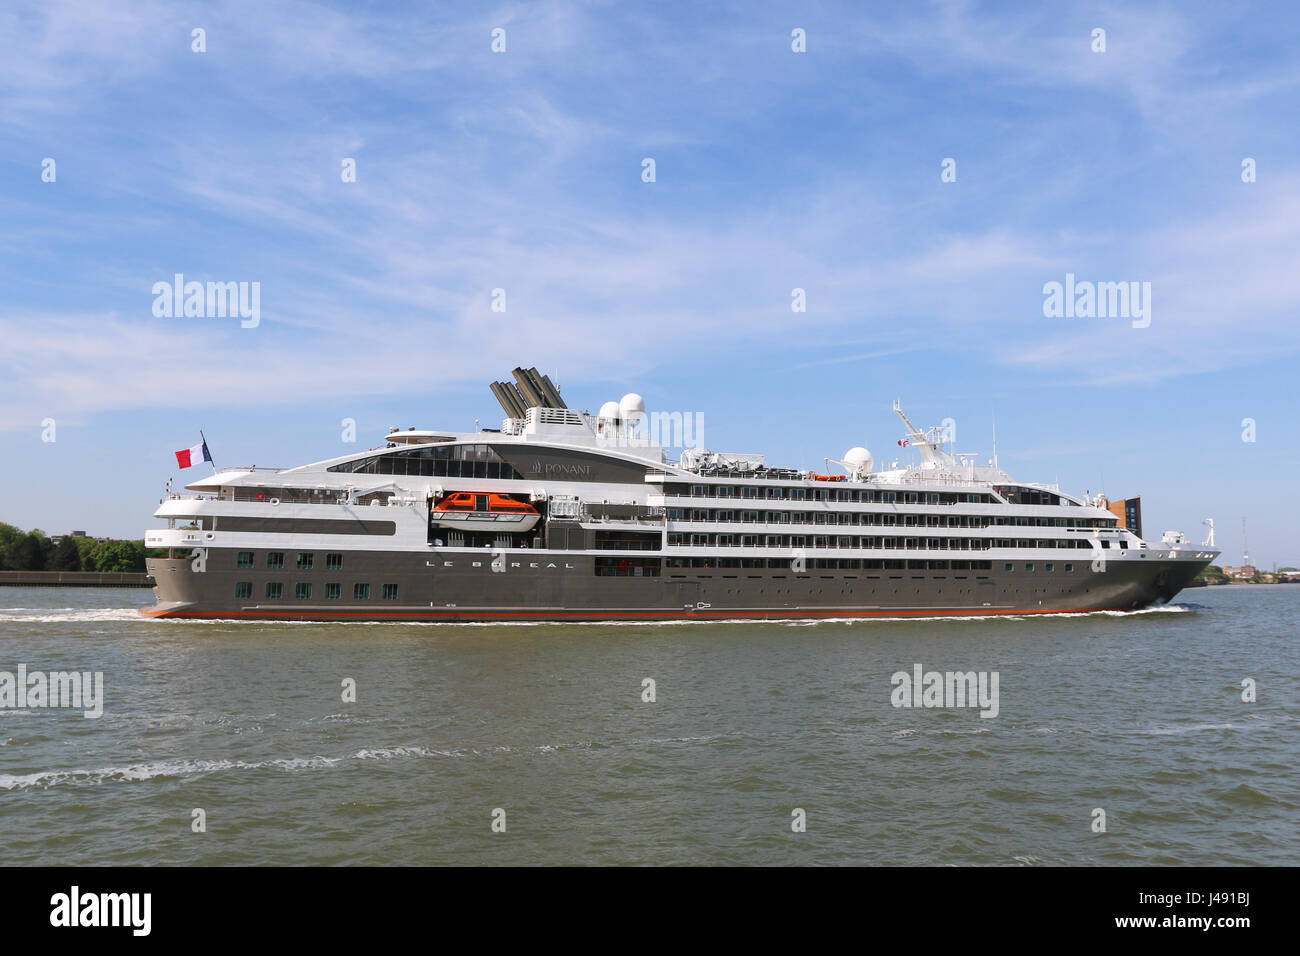 Gravesend, Kent, United Kingdom. 8th May, 2017. French cruise ship Le Boreal pictured passing Gravesend as she sailed up the River Thames towards London today. The grey ship's arrival on a grey day marks the beginning of London's cruise ship season for 2017. Rob Powell/Alamy Live News Stock Photo